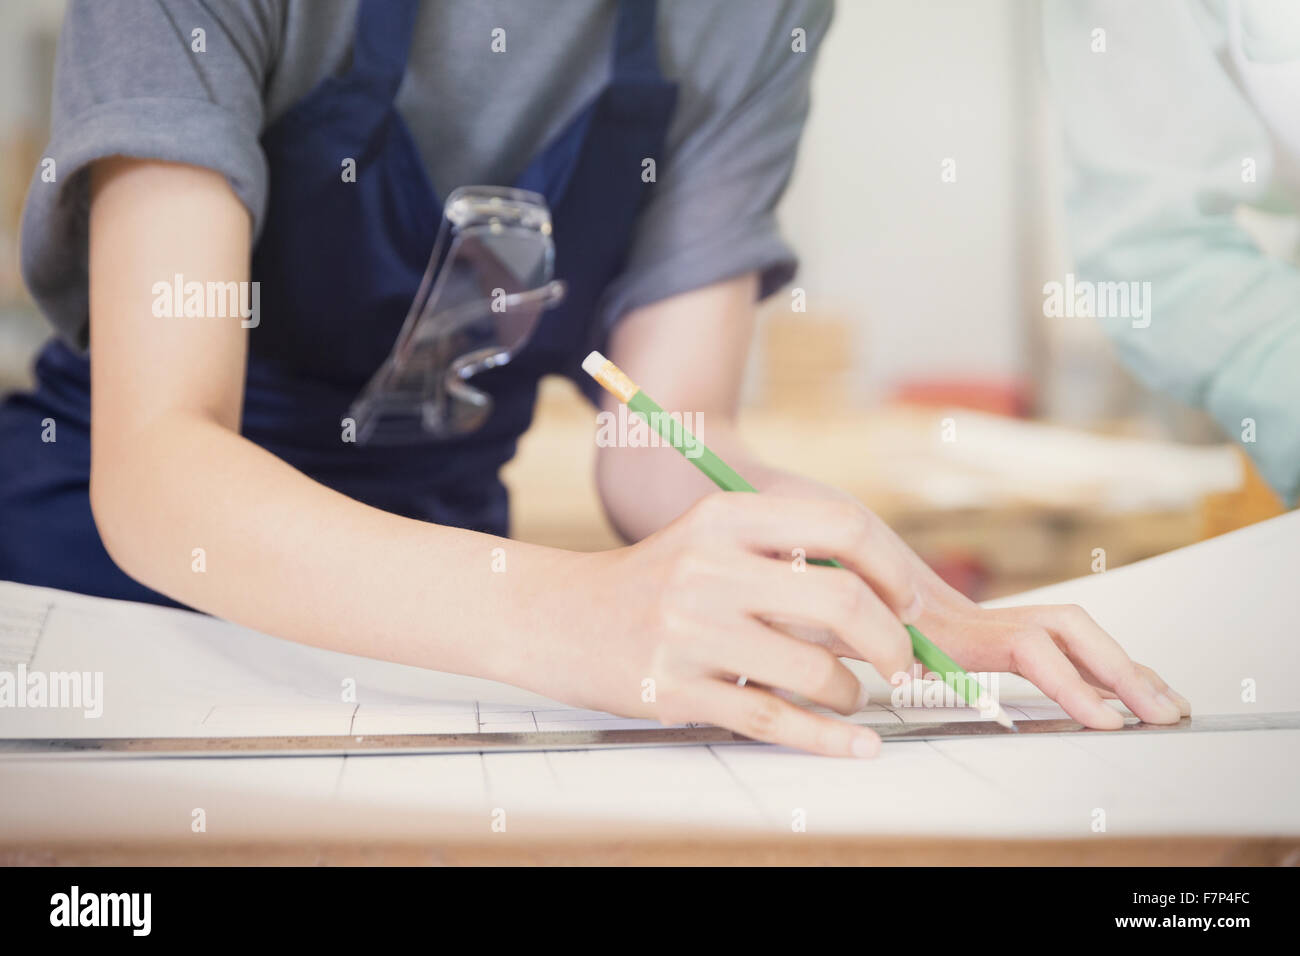 Carpenter drafting plans with pencil and ruler Stock Photo